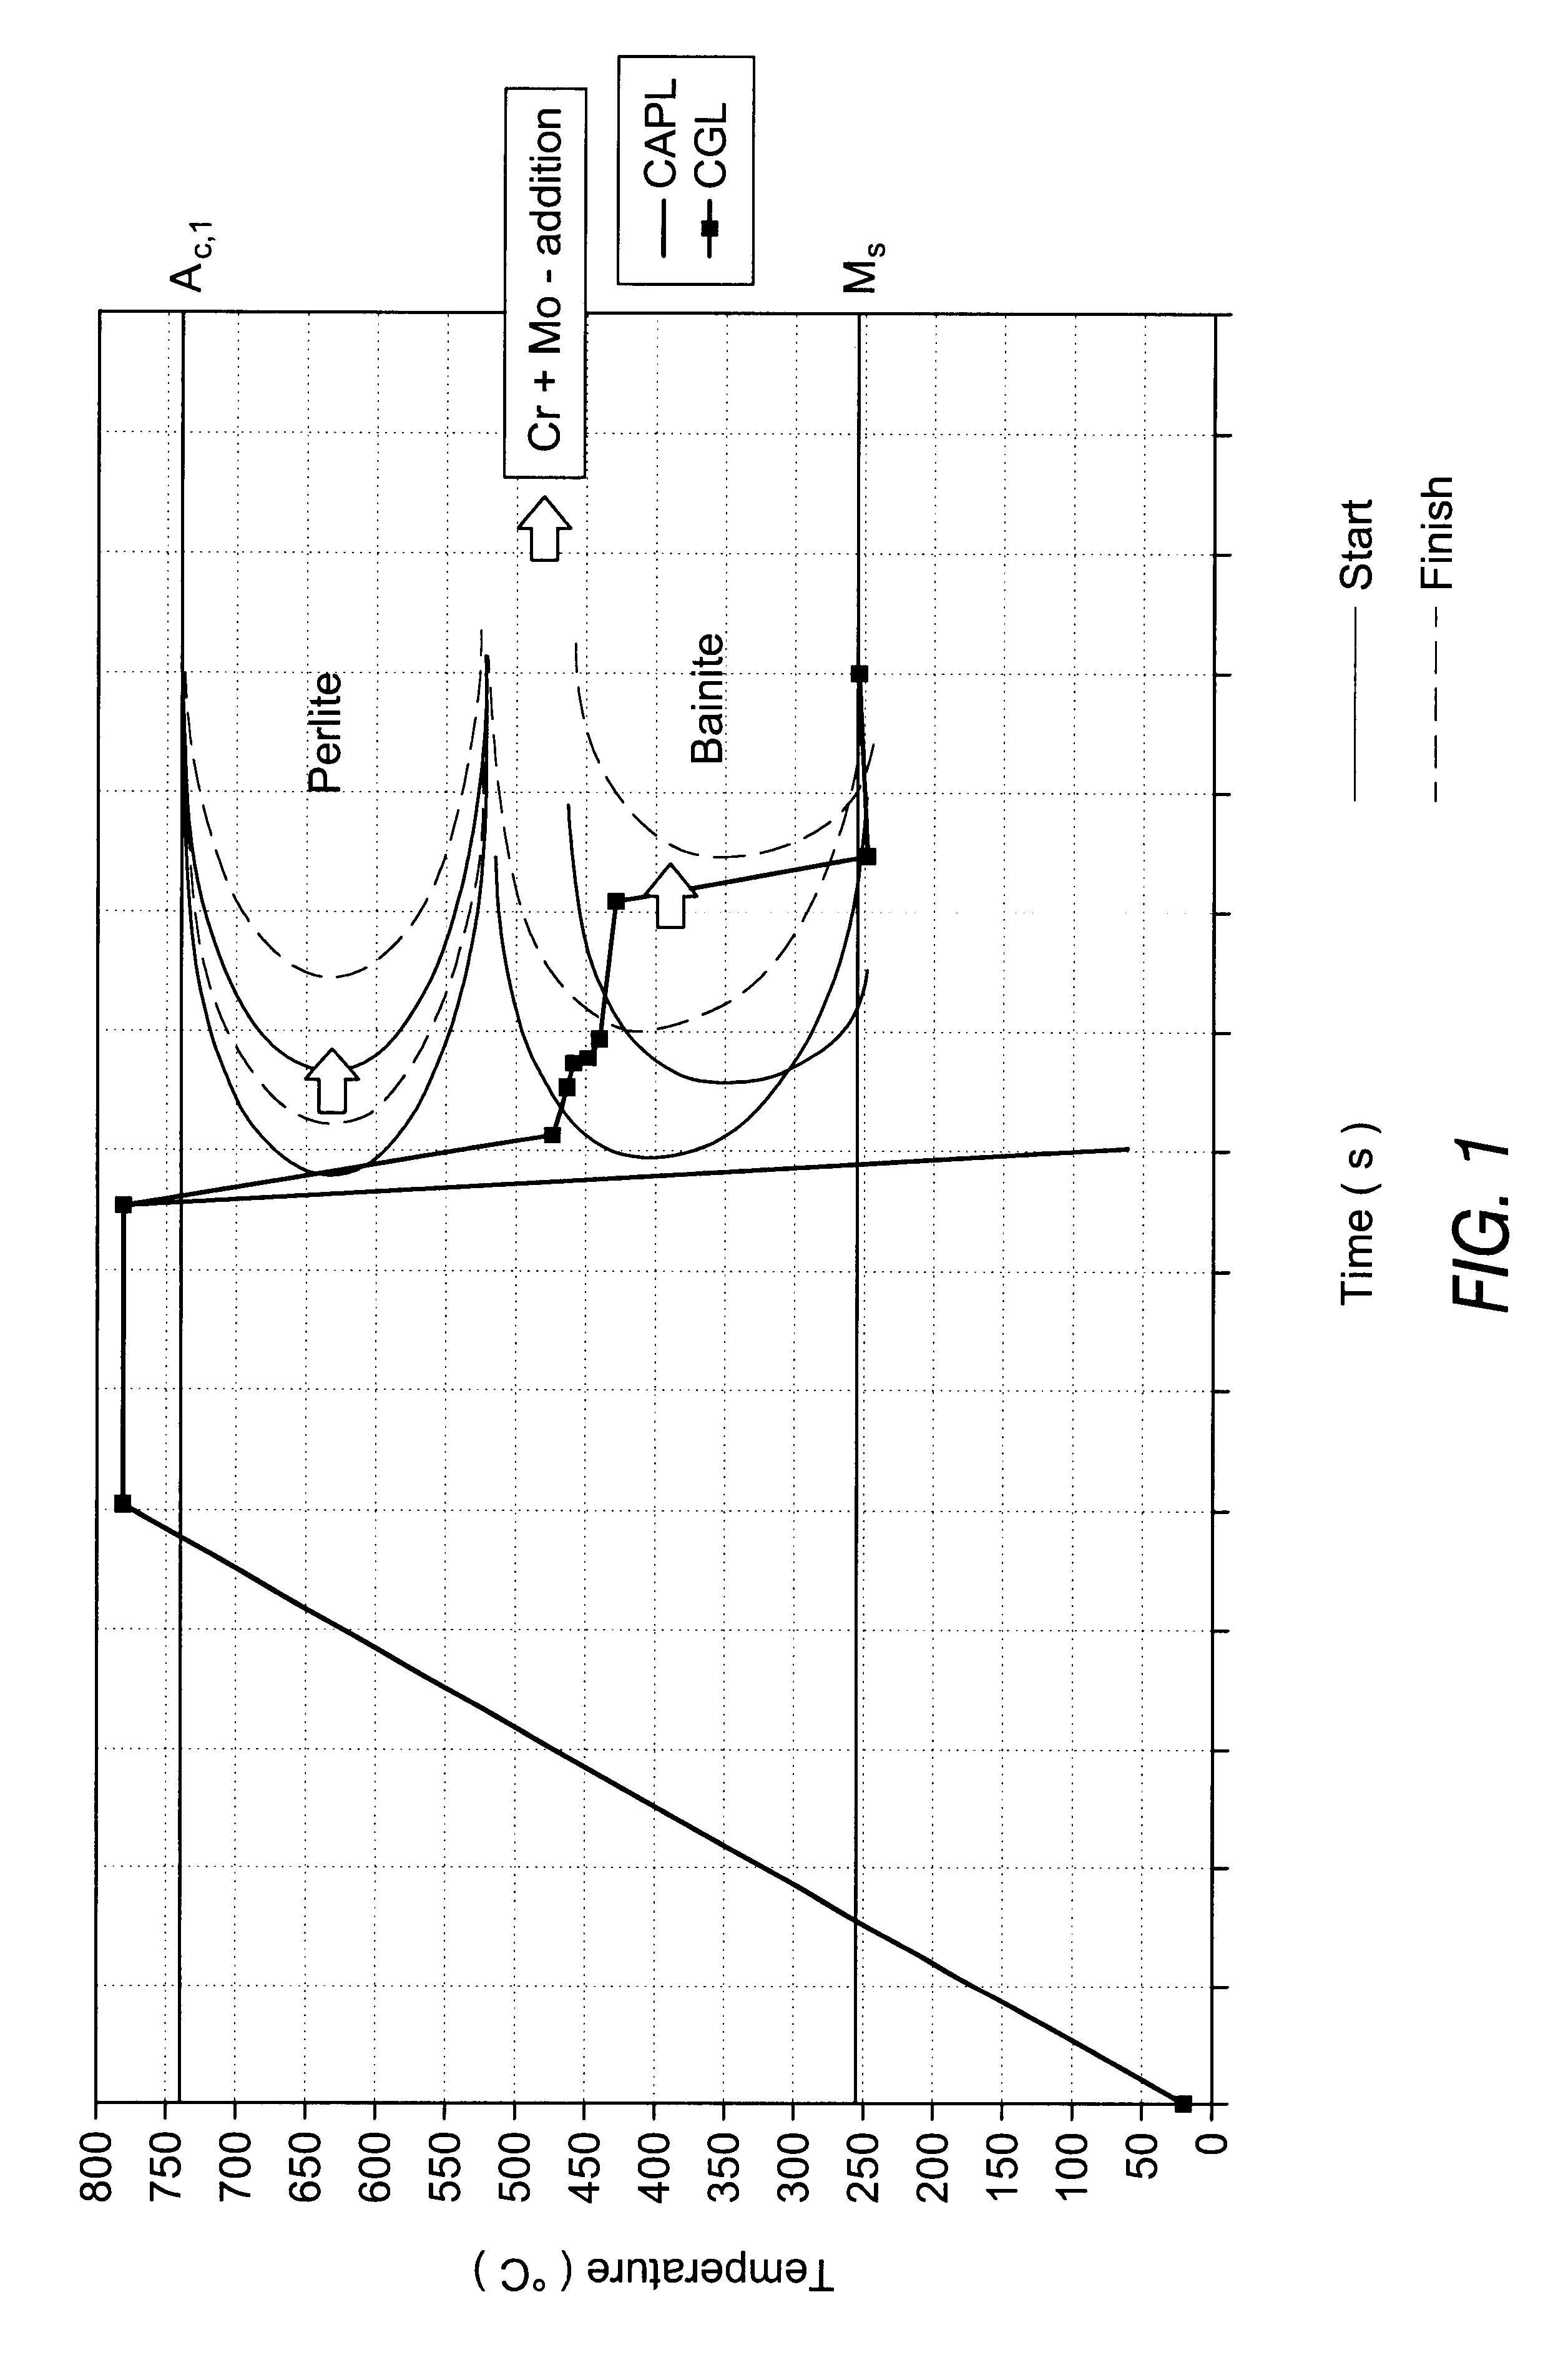 Method of production of cold-rolled metal coated steel products, and the products obtained, having a low yield ratio